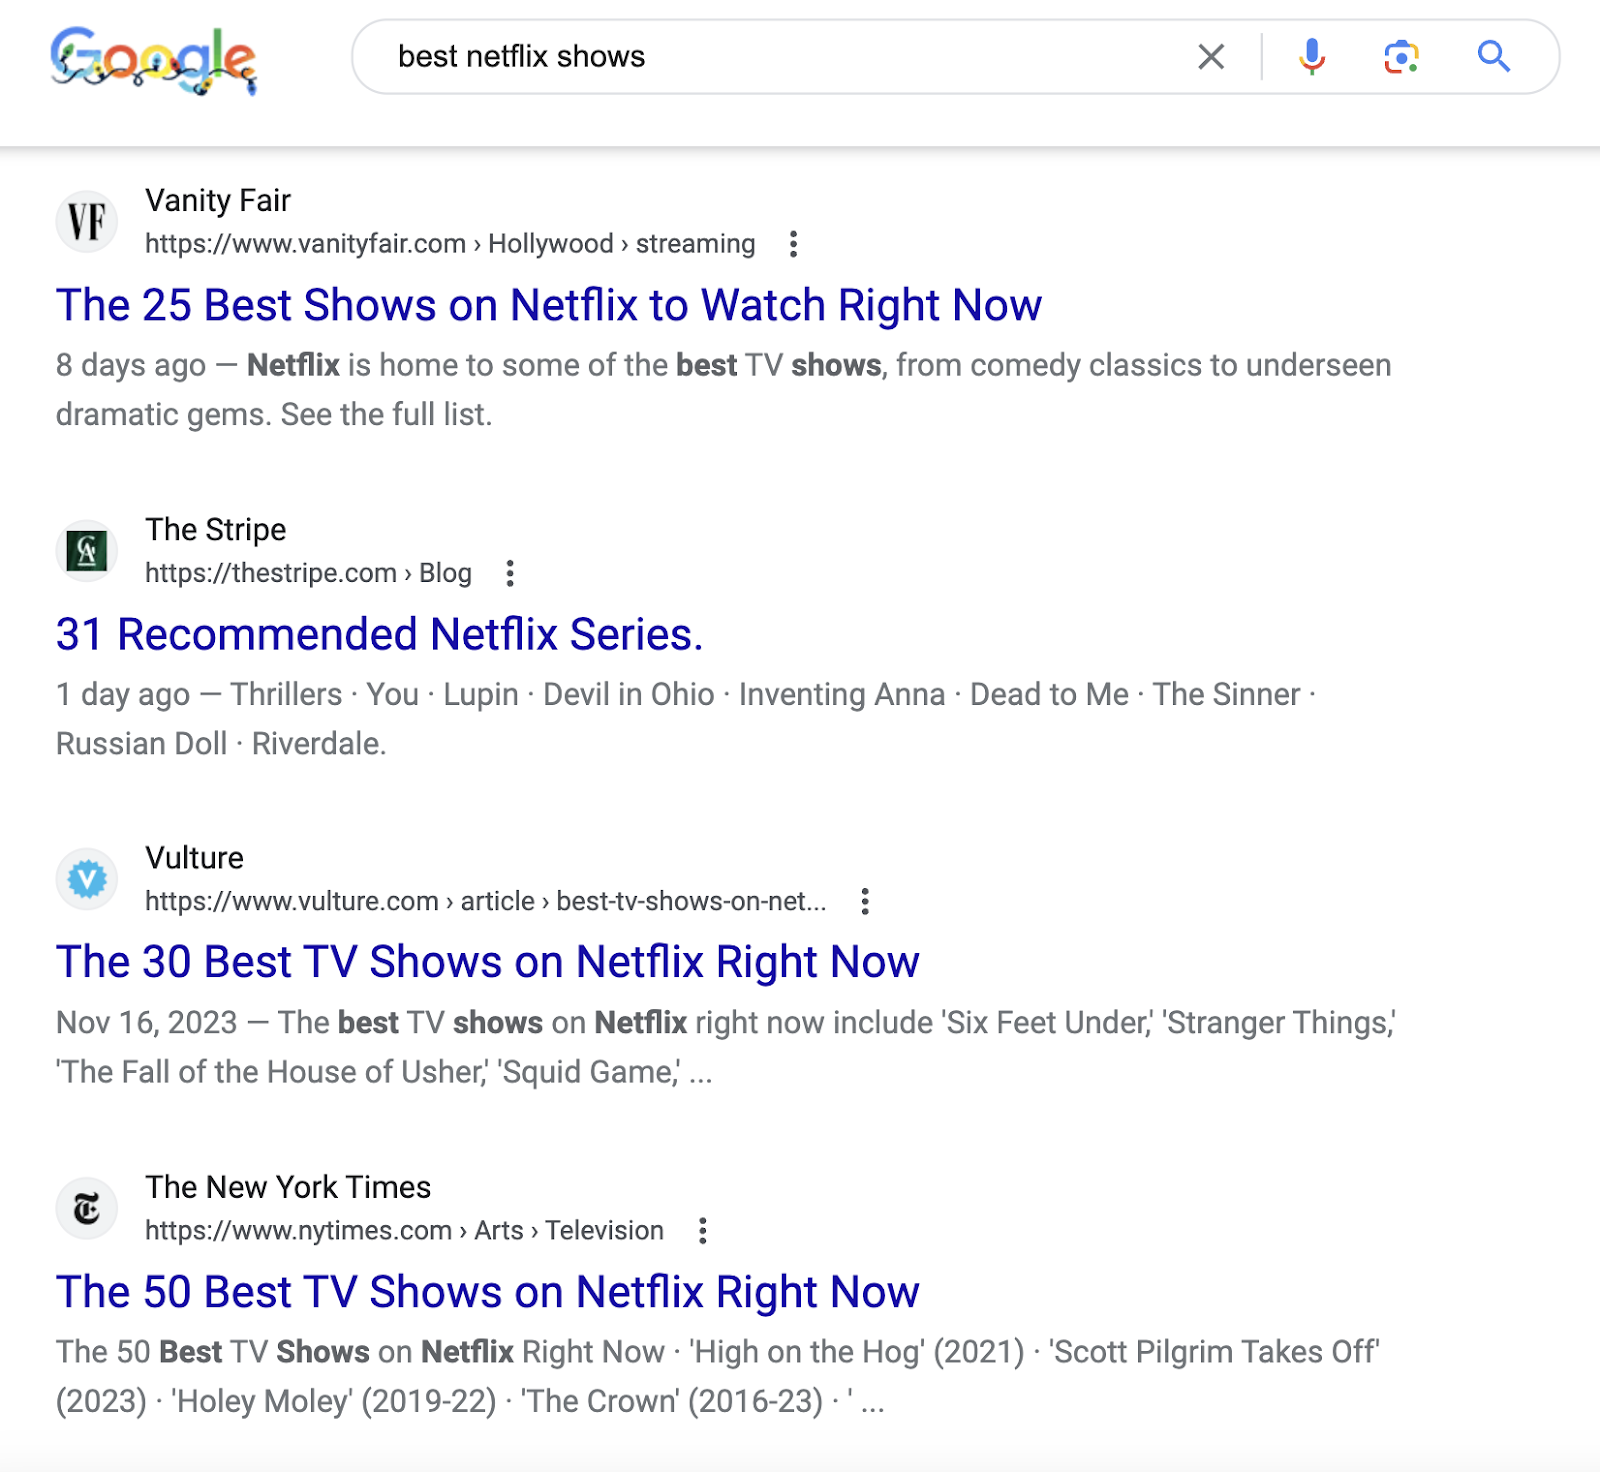 Google's search results for "best netflix shows"